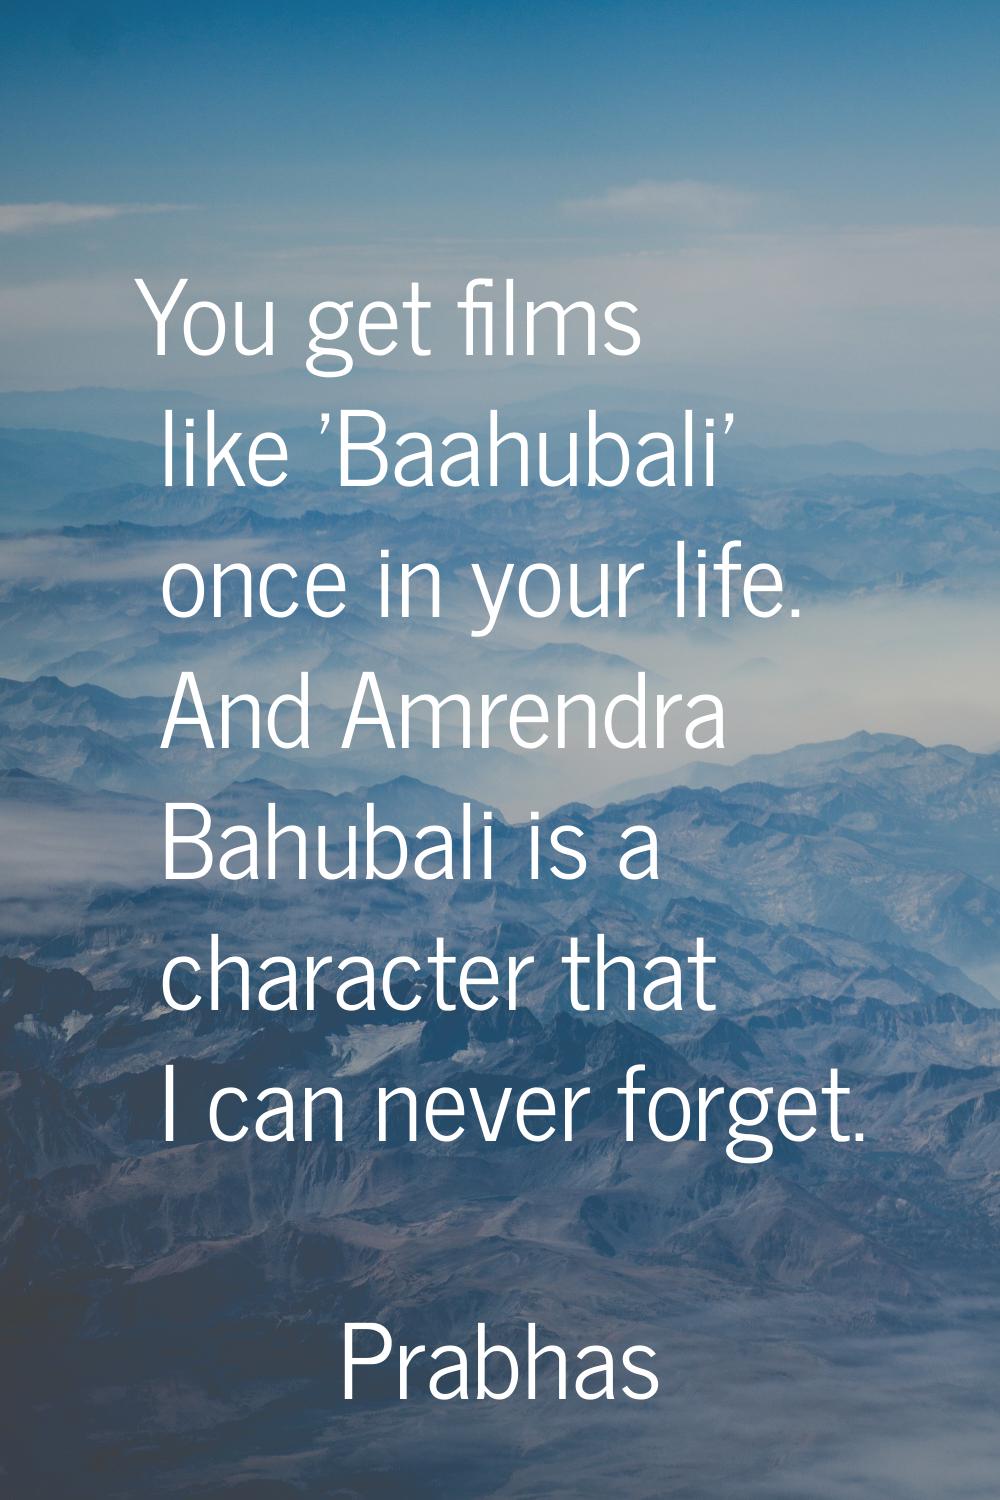 You get films like 'Baahubali' once in your life. And Amrendra Bahubali is a character that I can n